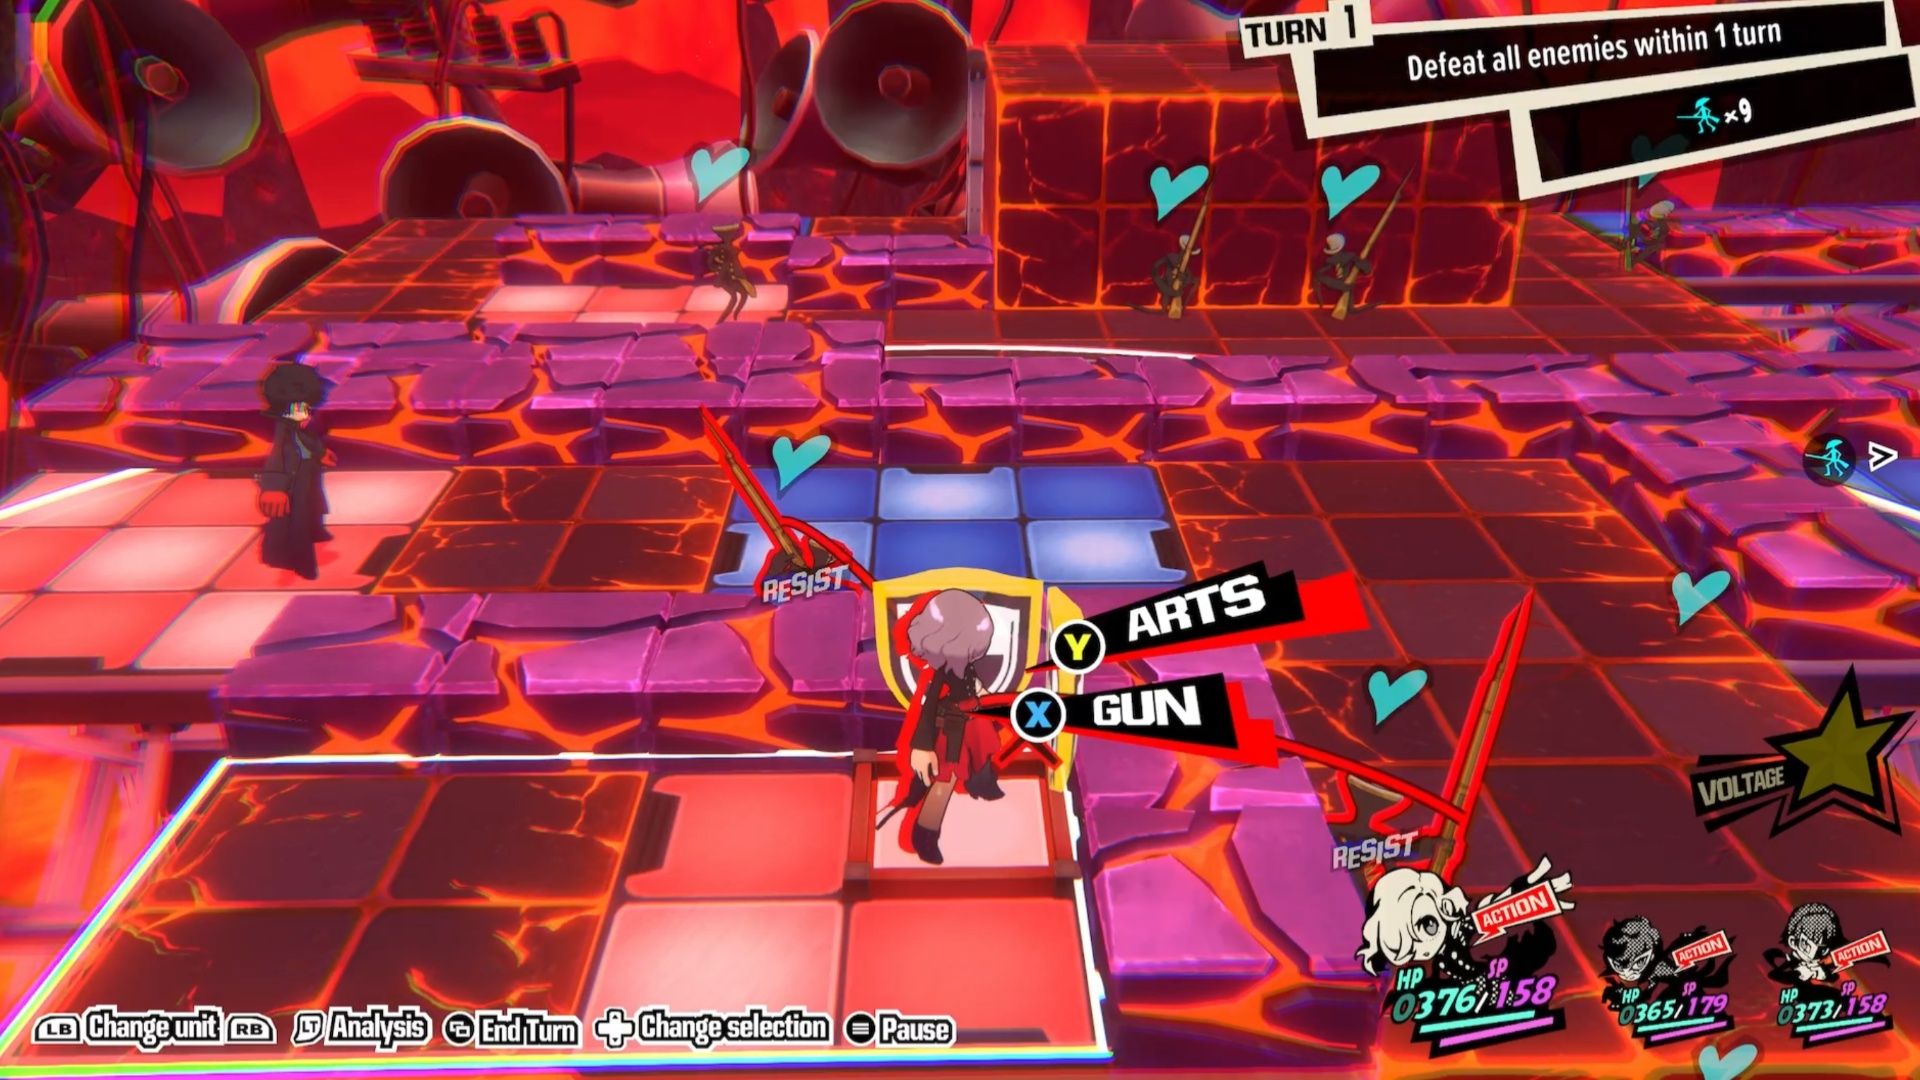 Erina stands on the red platform button to change the floor layout during Quest 12 in Persona 5 Tactica.